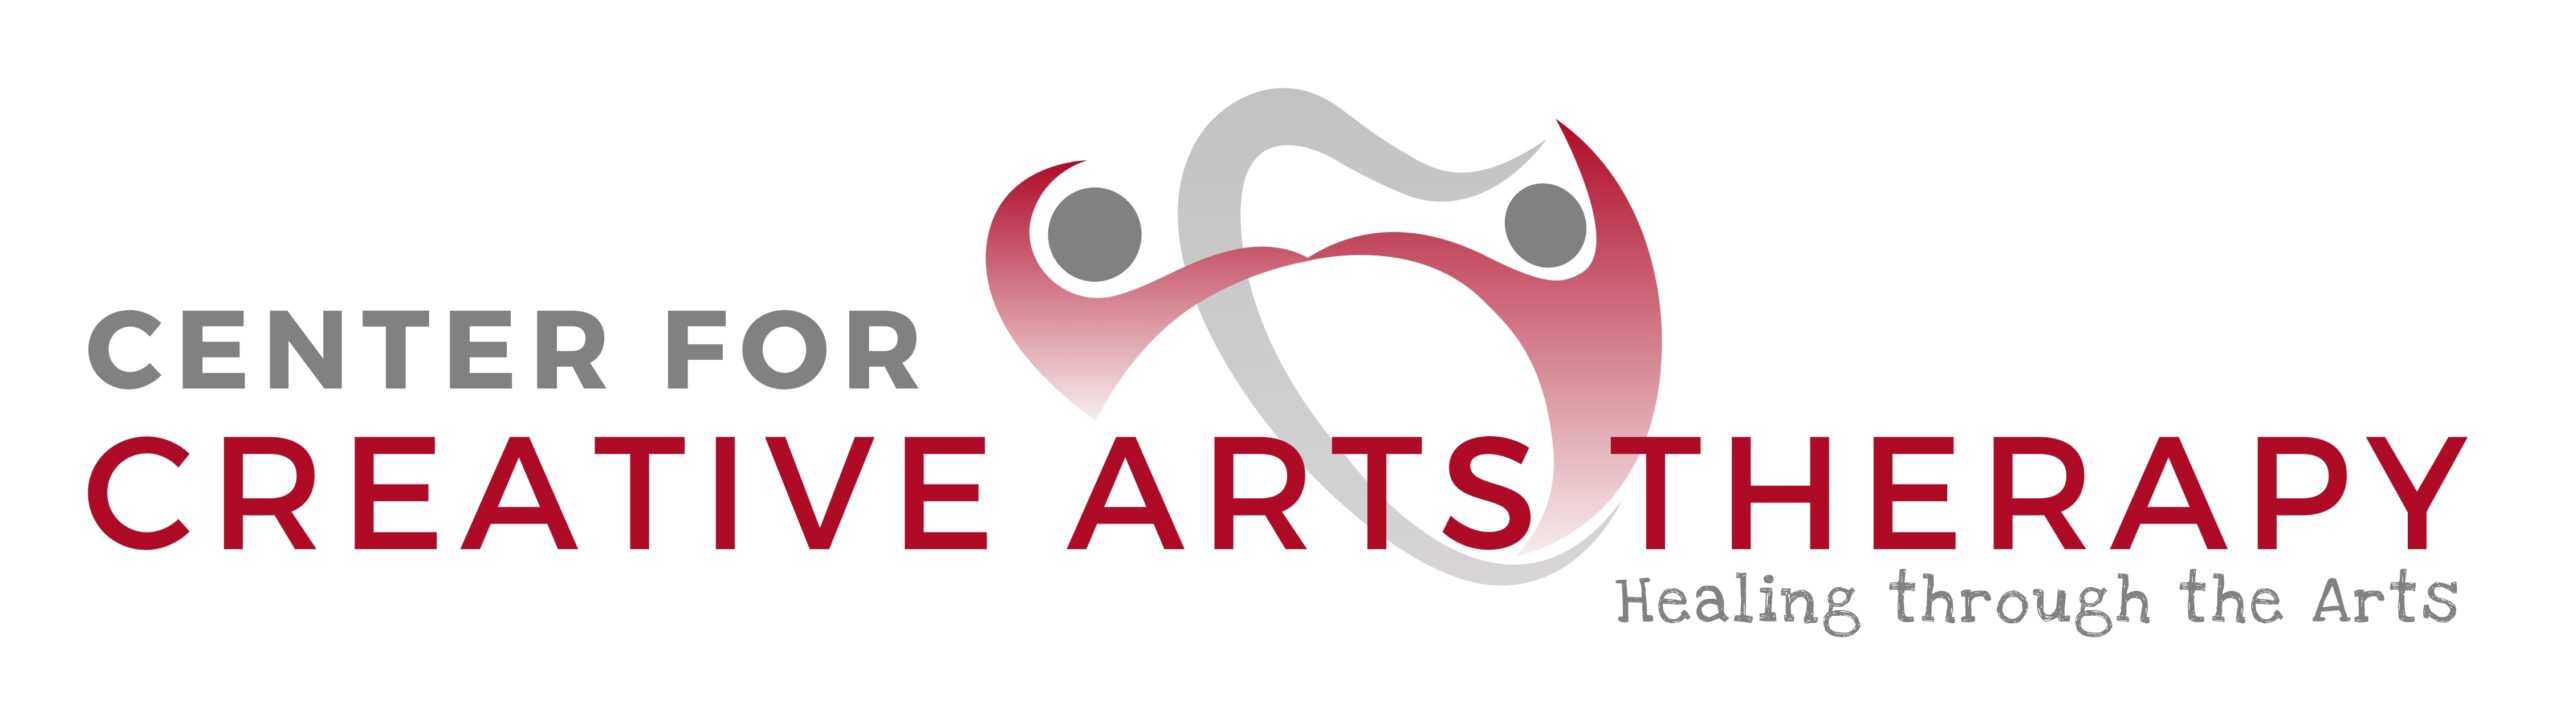 Vote The Center for Creative Arts Therapy for The WomensNet Amber Grant